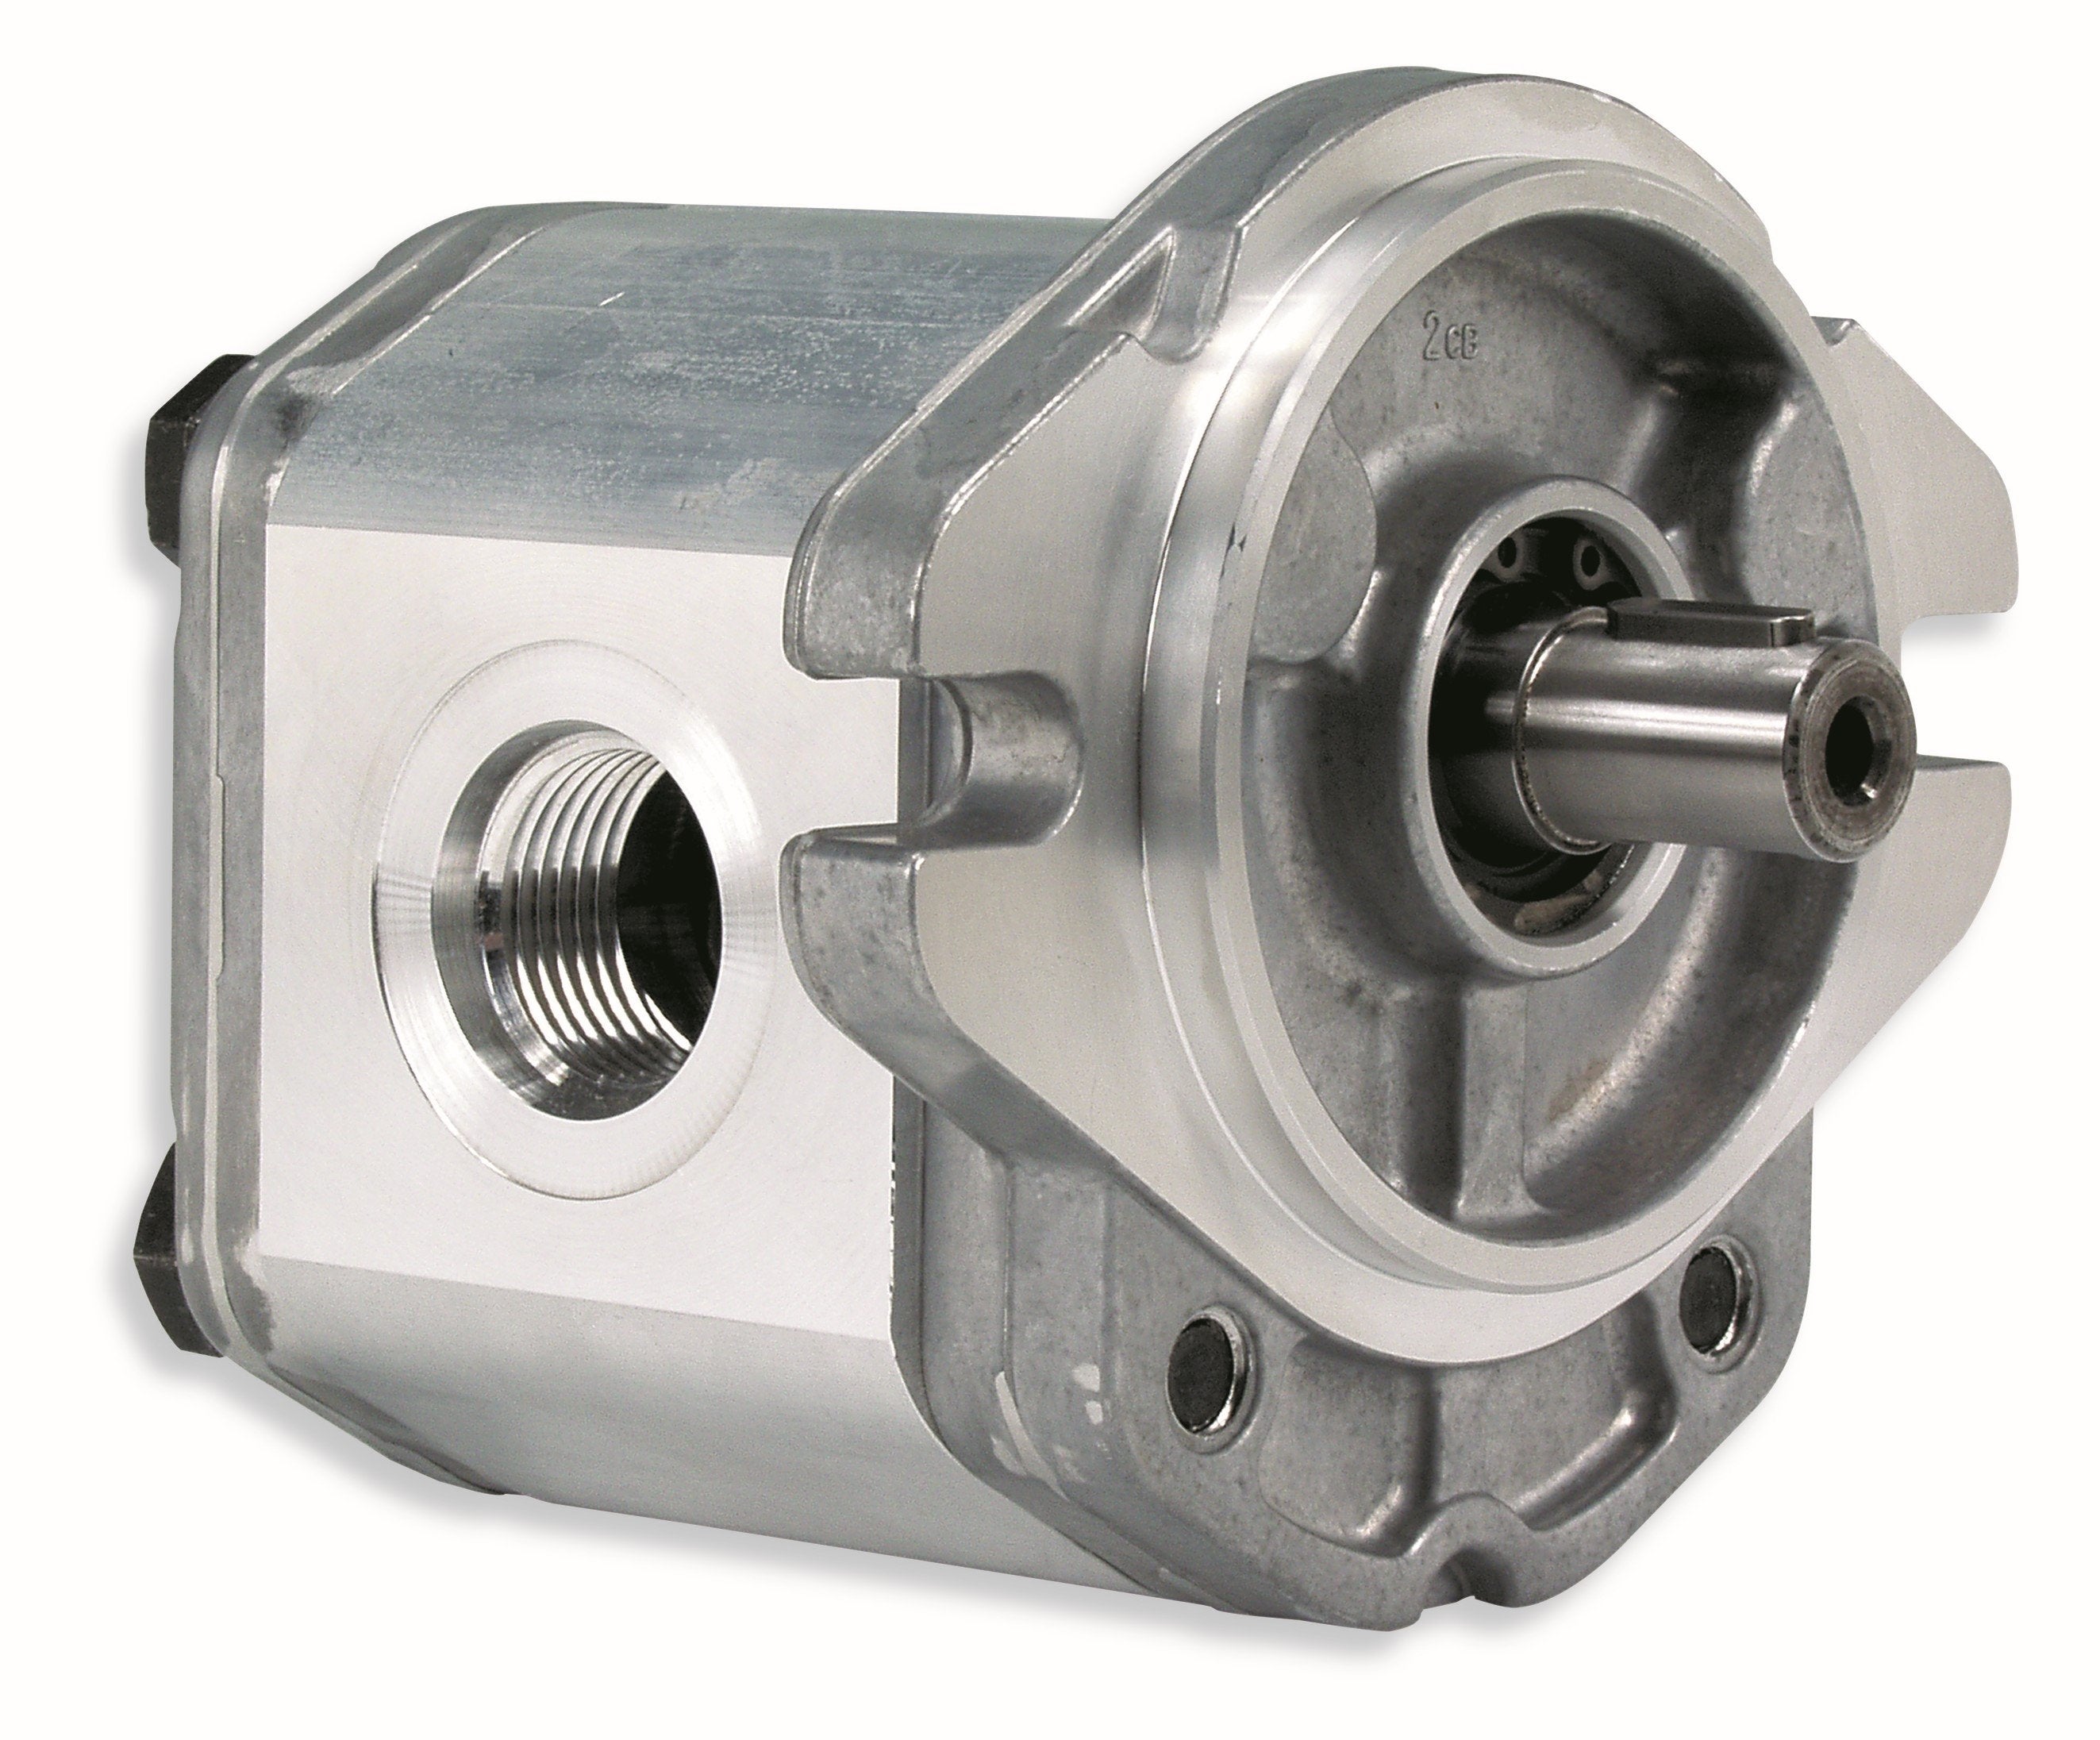 GHM1A-R-5-E2 : Marzocchi Gear Motor, Bidirectional, 3.5cc, 3915psi rated, 5000RPM, 0.5 (1/2") #8 SAE ports, 1/2" Bore x 1/8" Keyed Shaft